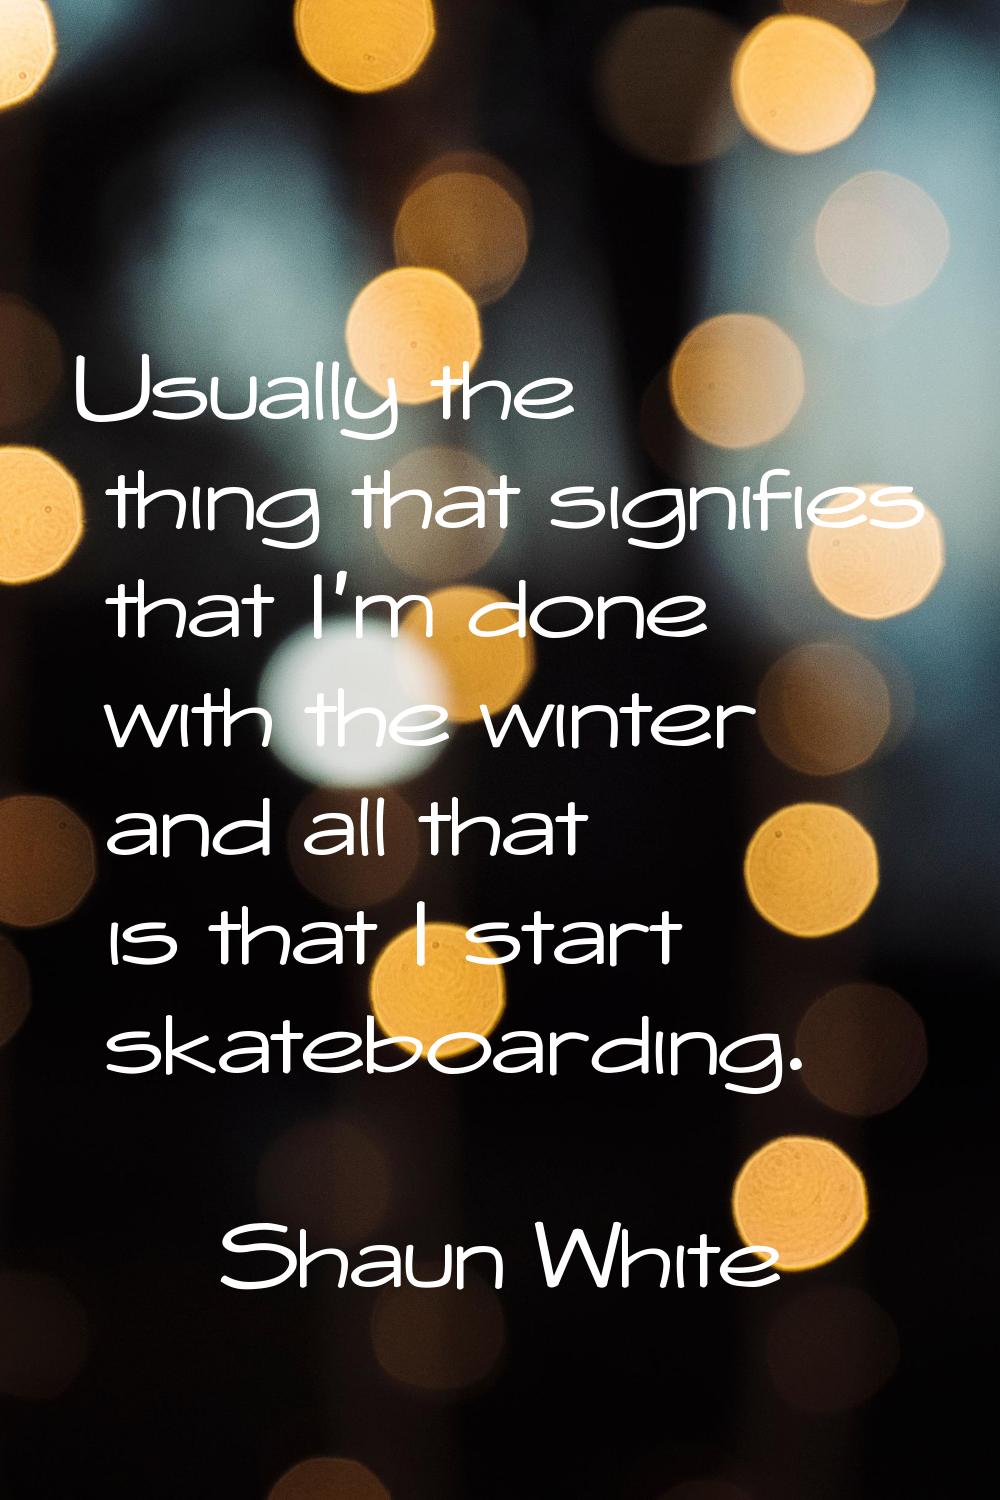 Usually the thing that signifies that I'm done with the winter and all that is that I start skatebo